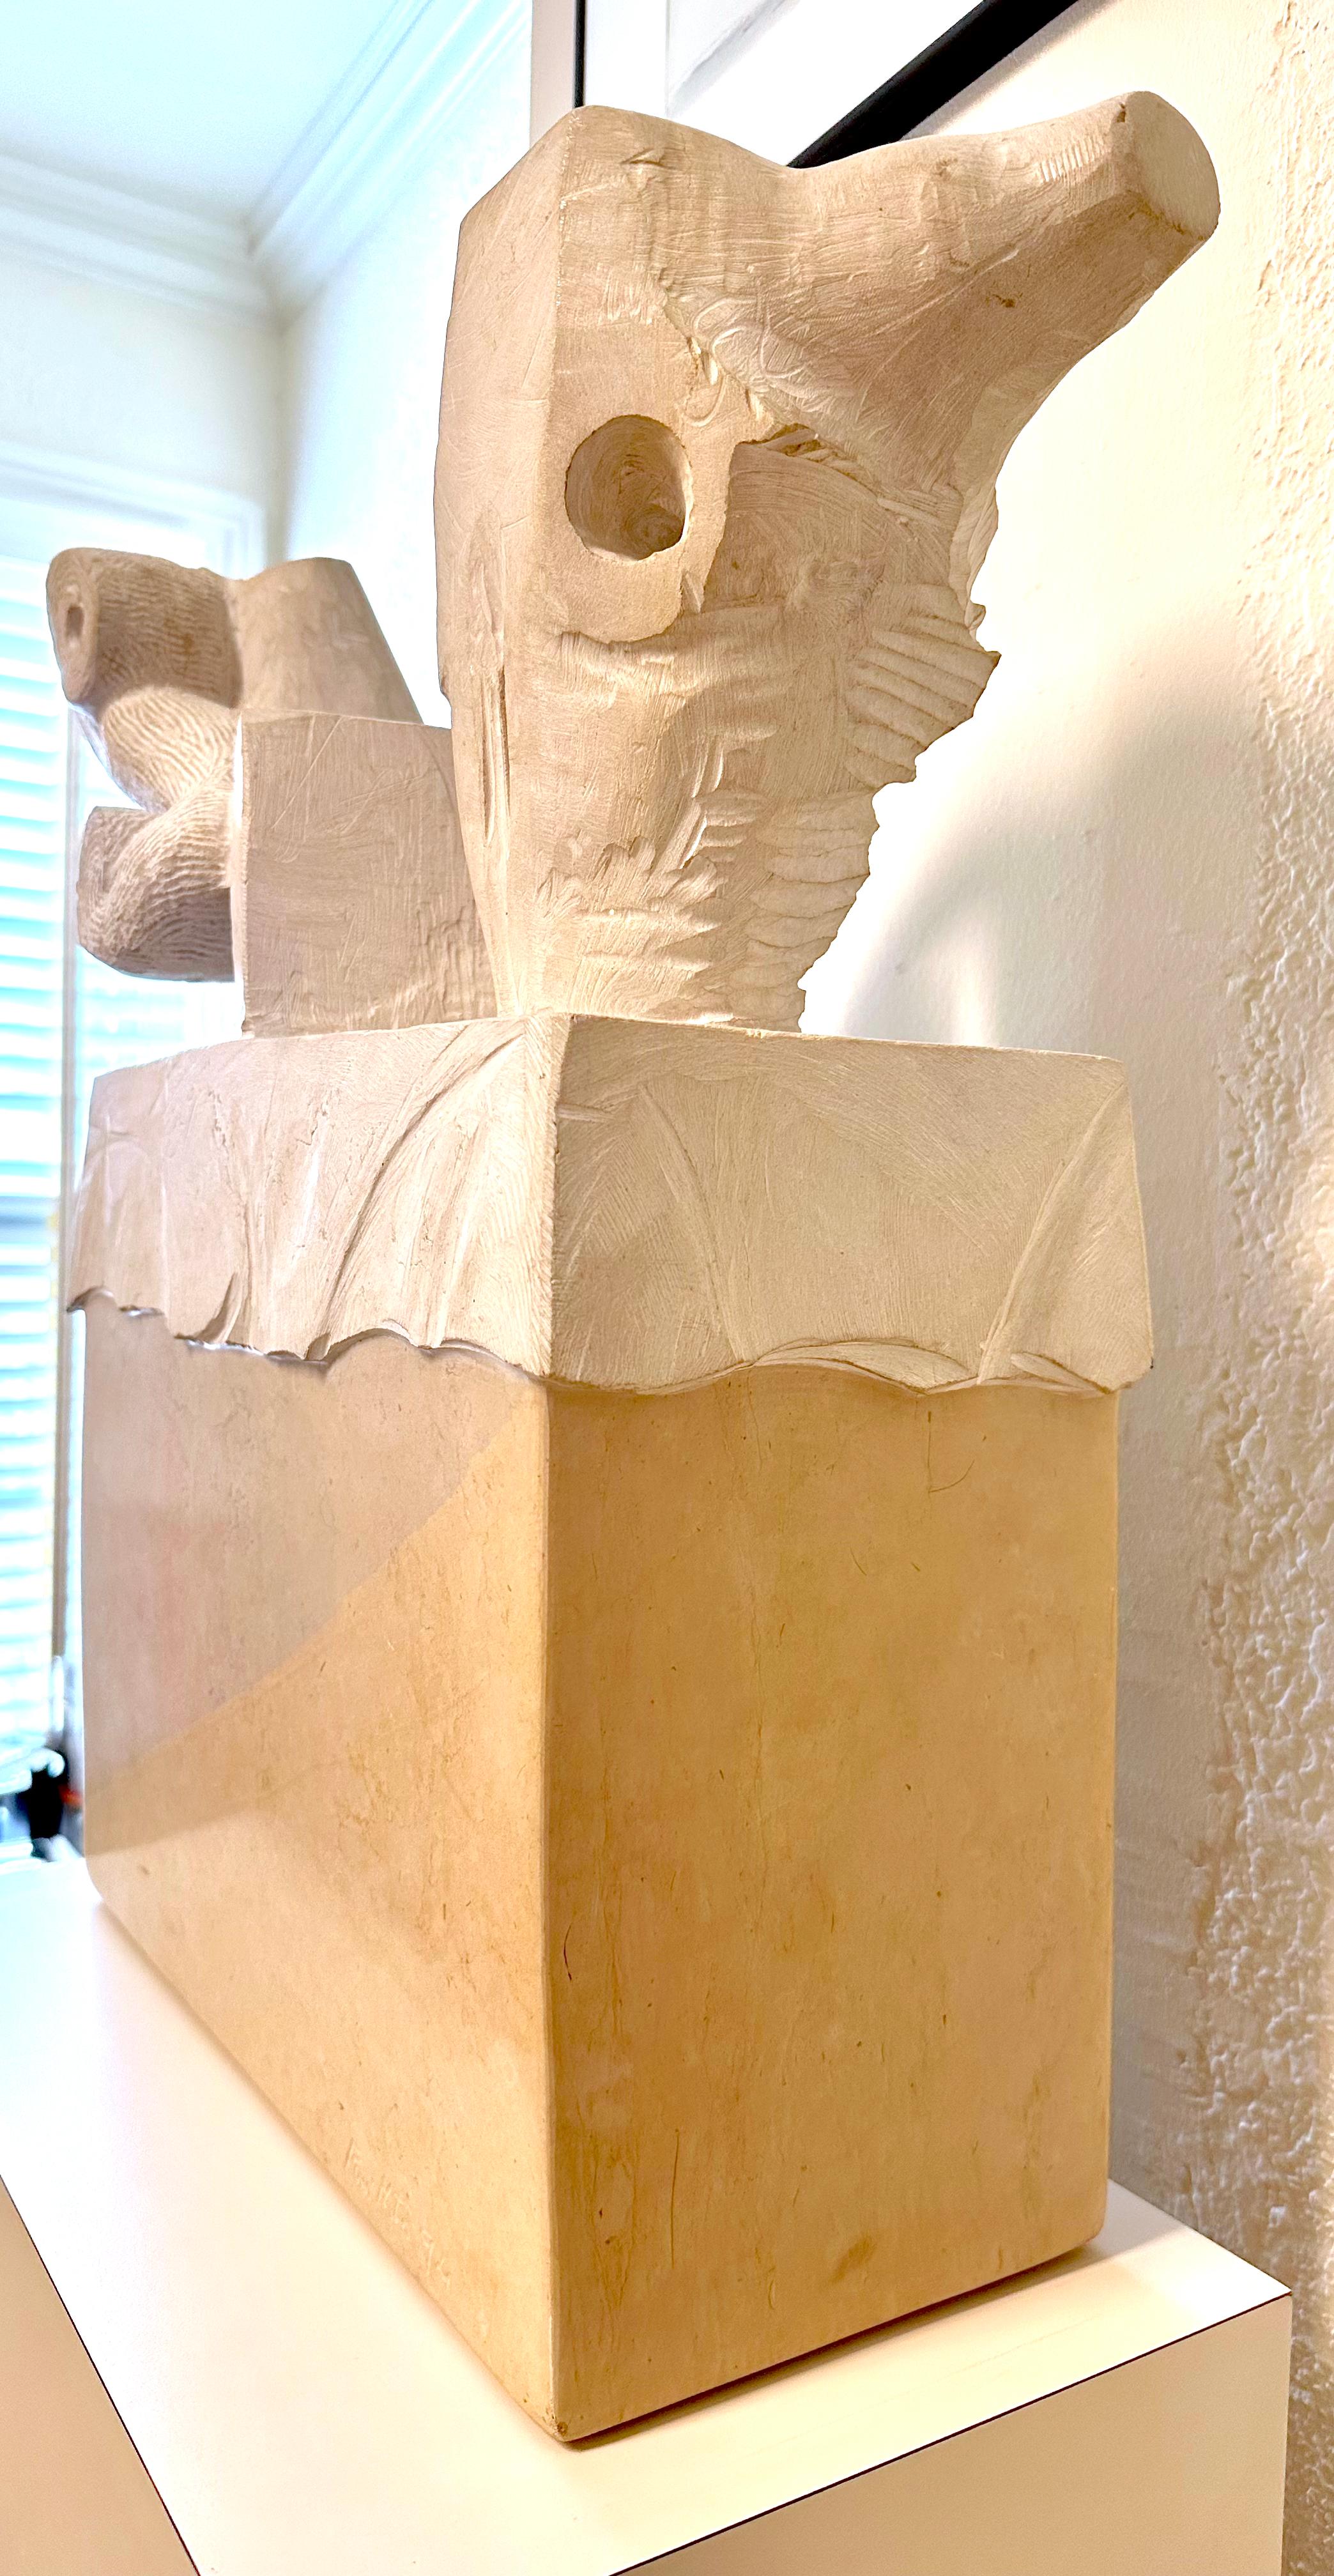 Rui Matos Limestone Sculpture, circa 1994.  Portuguese Sculptor mostly working in metals today.  When he first became active he was doing a lot in stone.  Just had a hugh restrospective of his work organized in Tavira.  Currently represented by